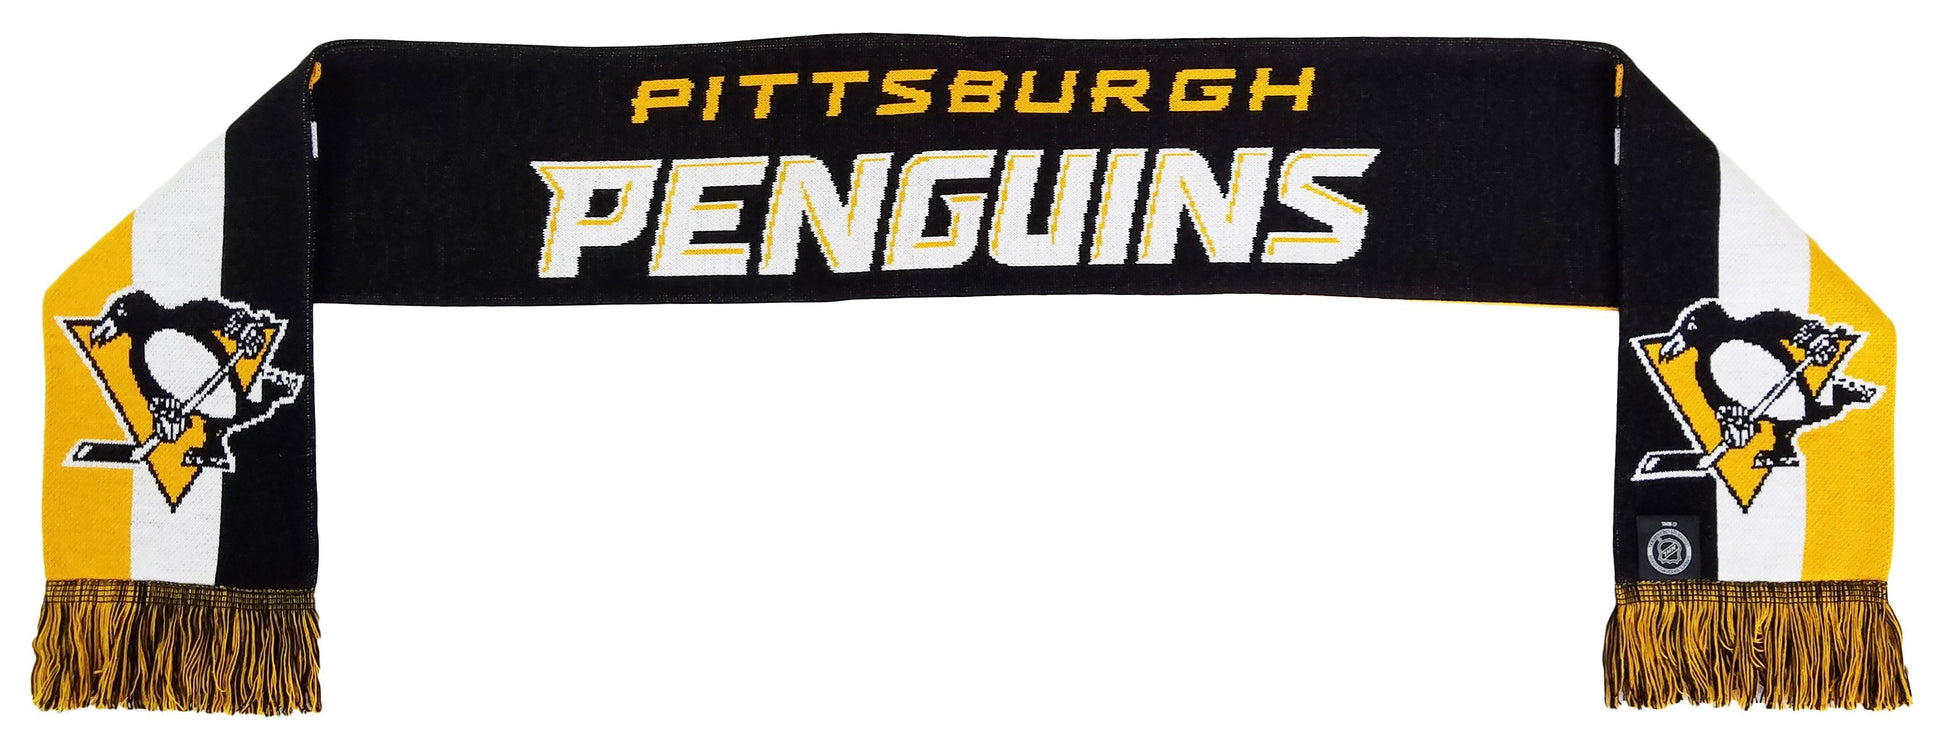 PITTSBURGH PENGUINS SCARF - Home Jersey